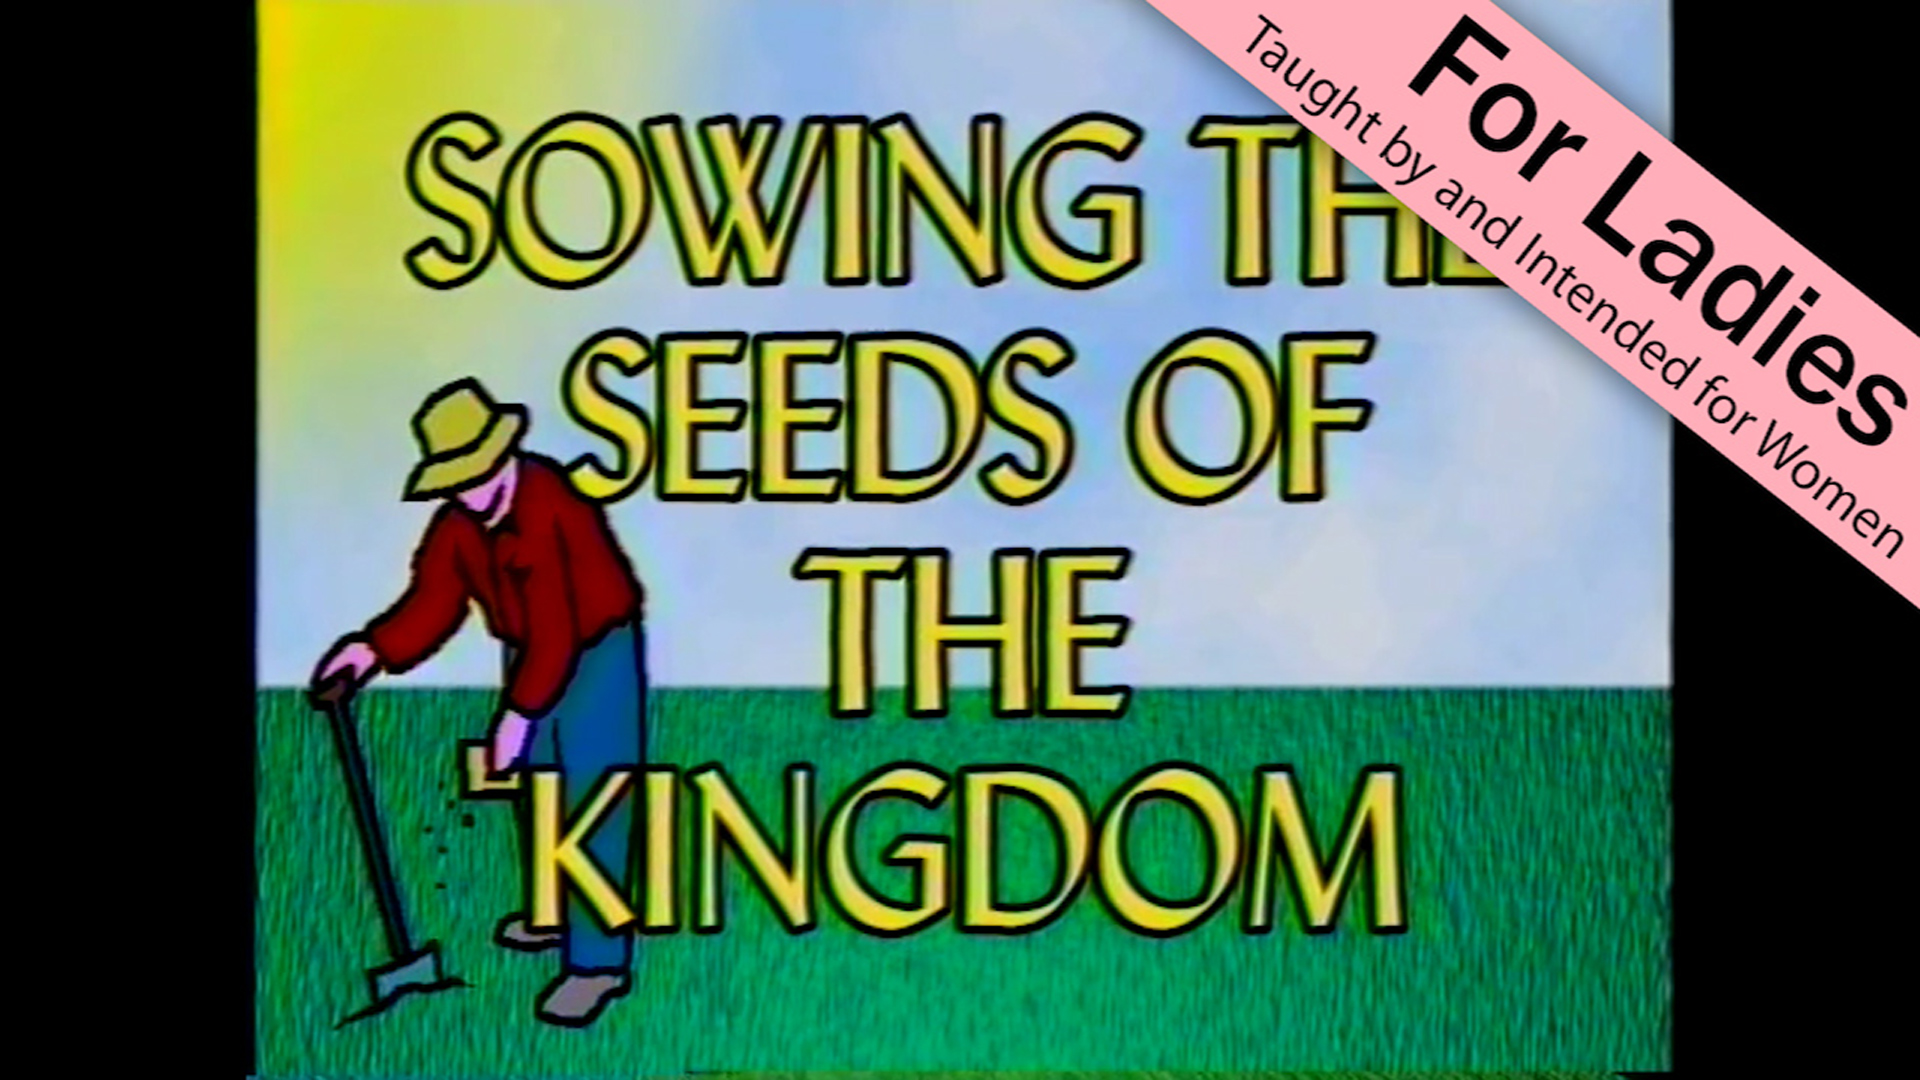 Sowing the Seed